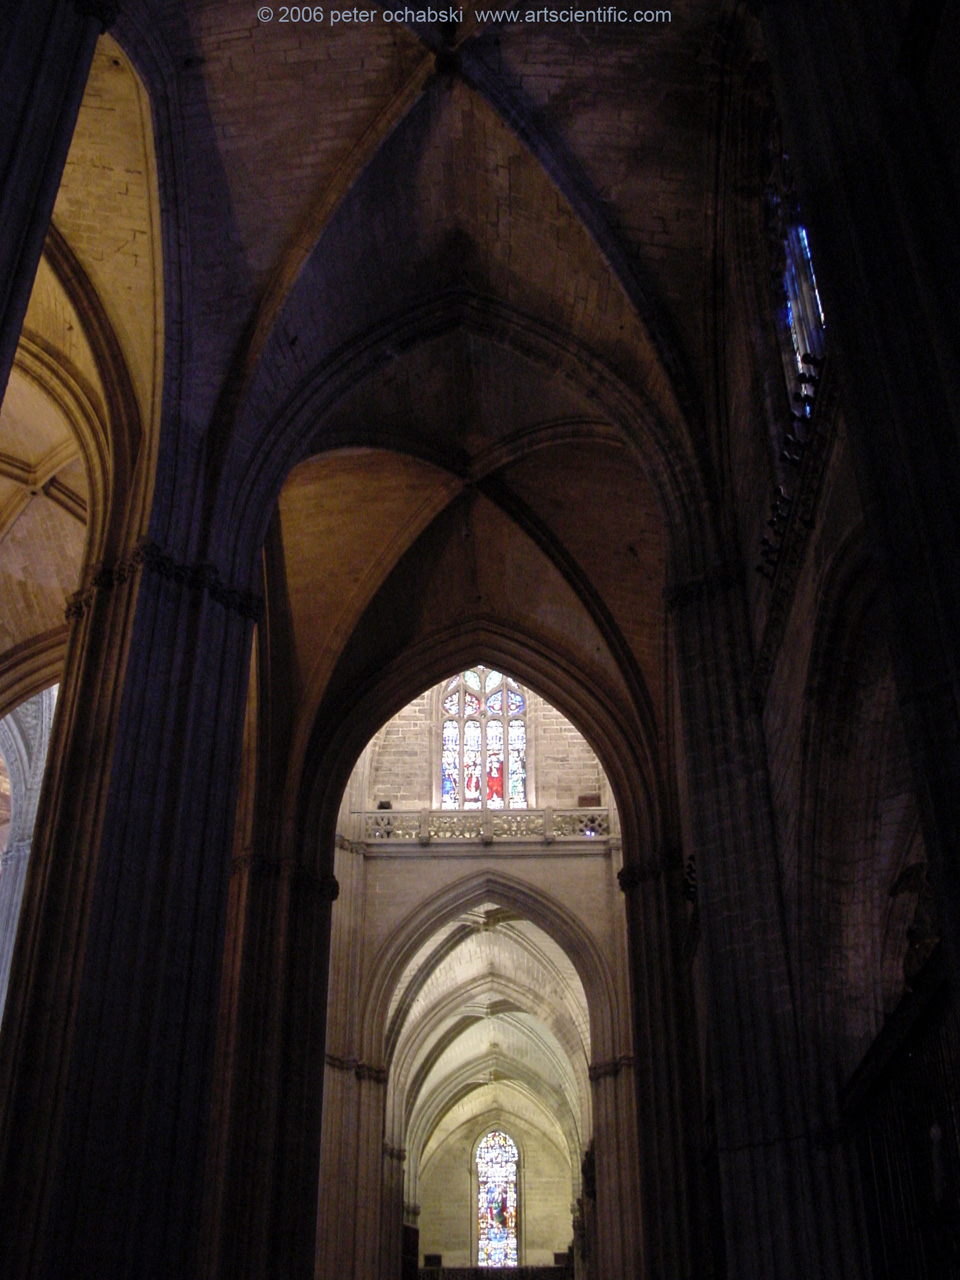 Sevilla cathdral vaulted ceiling